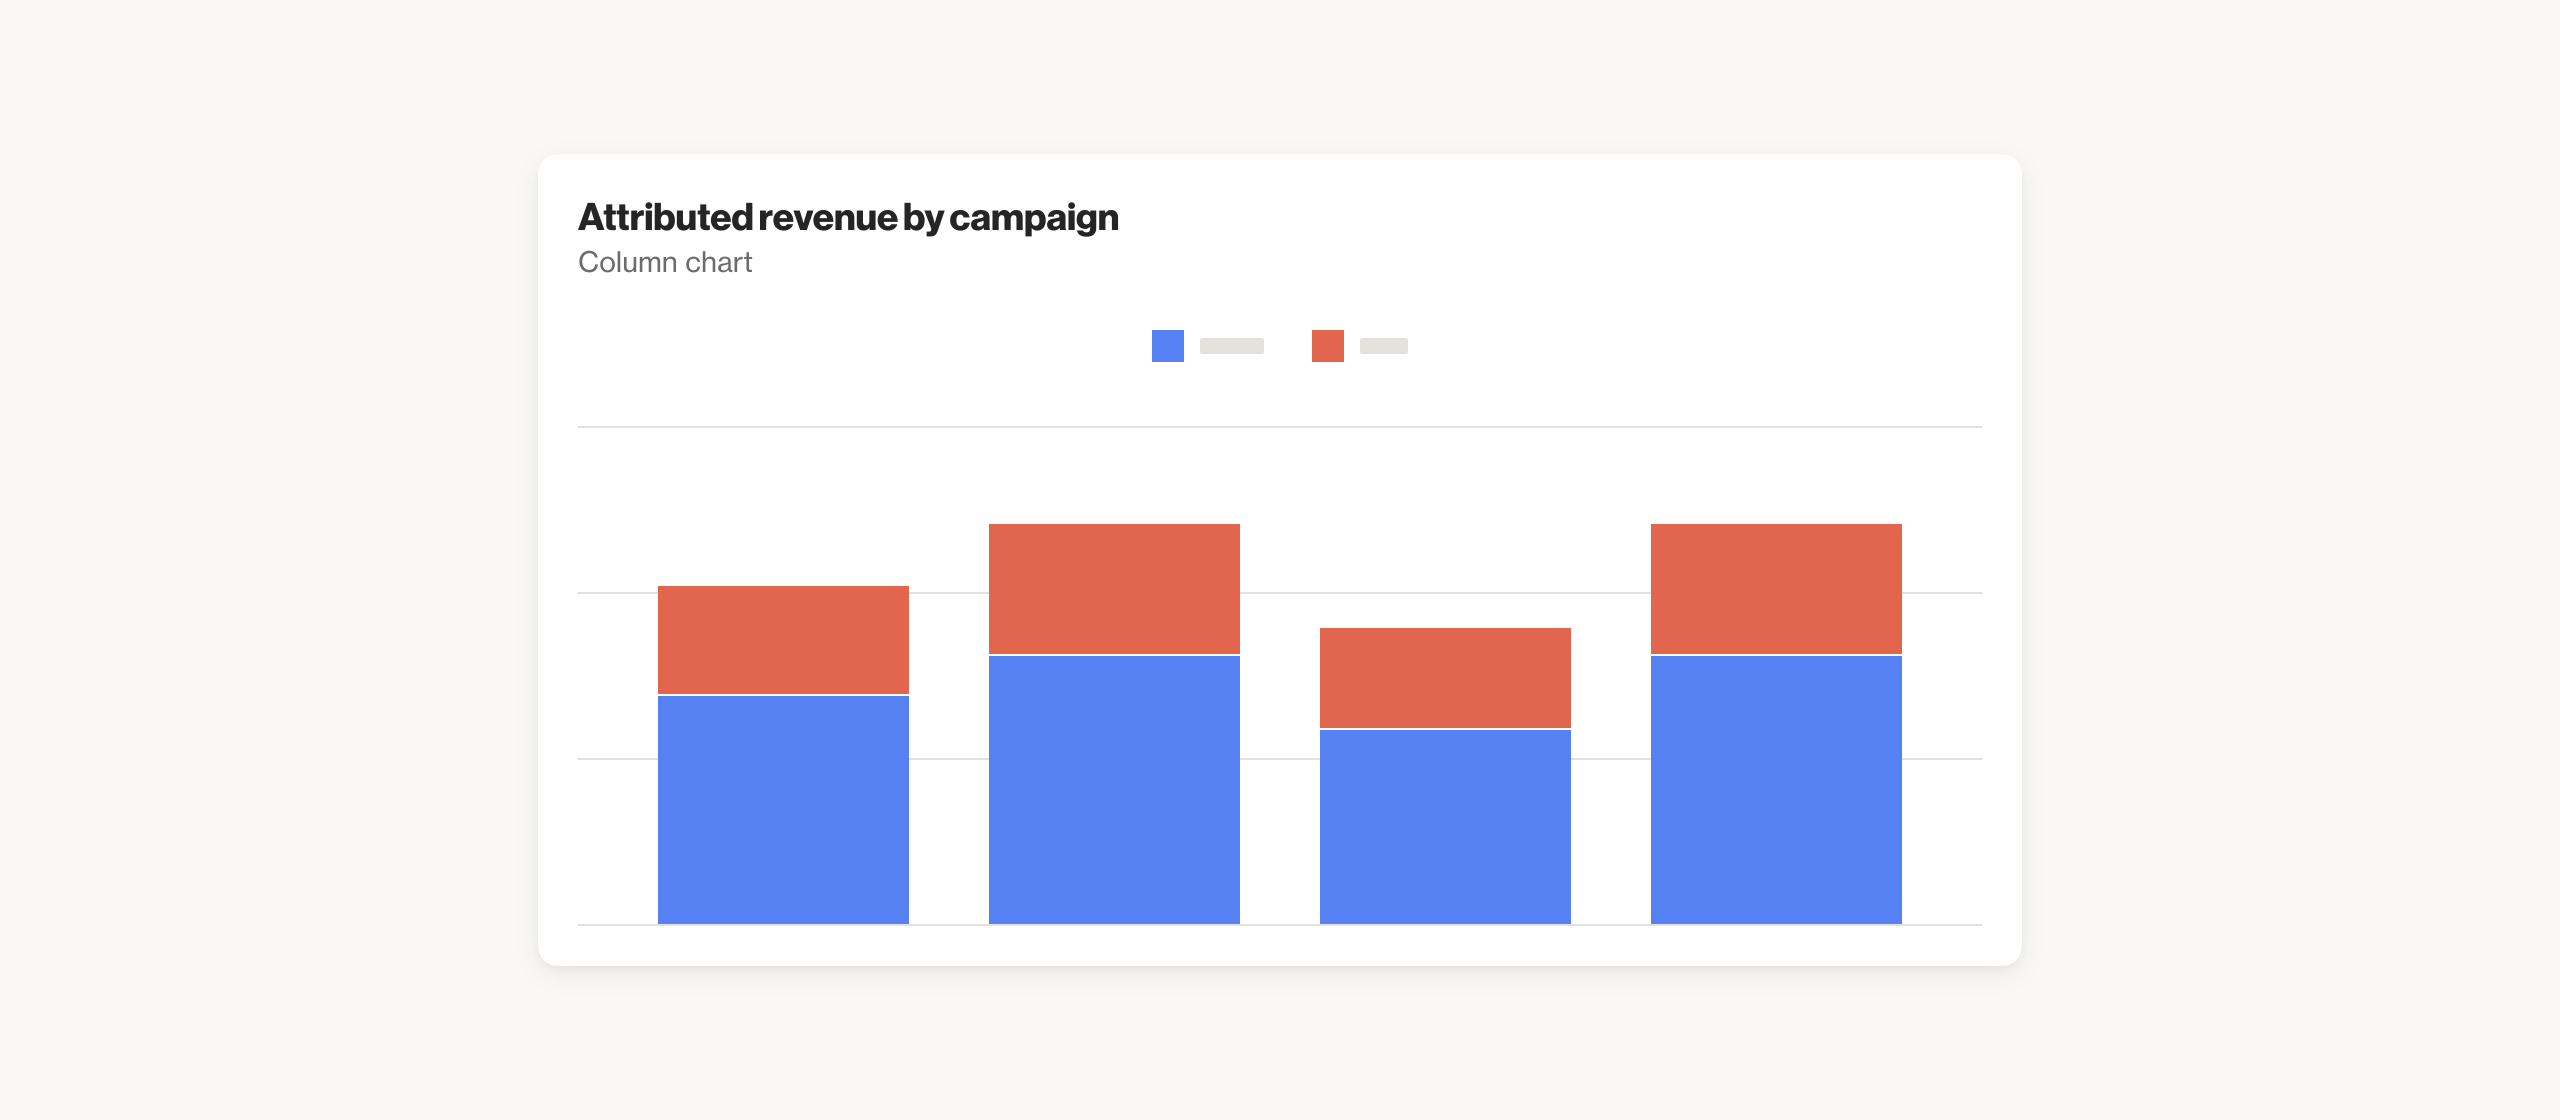 Attributed revenue by campaign